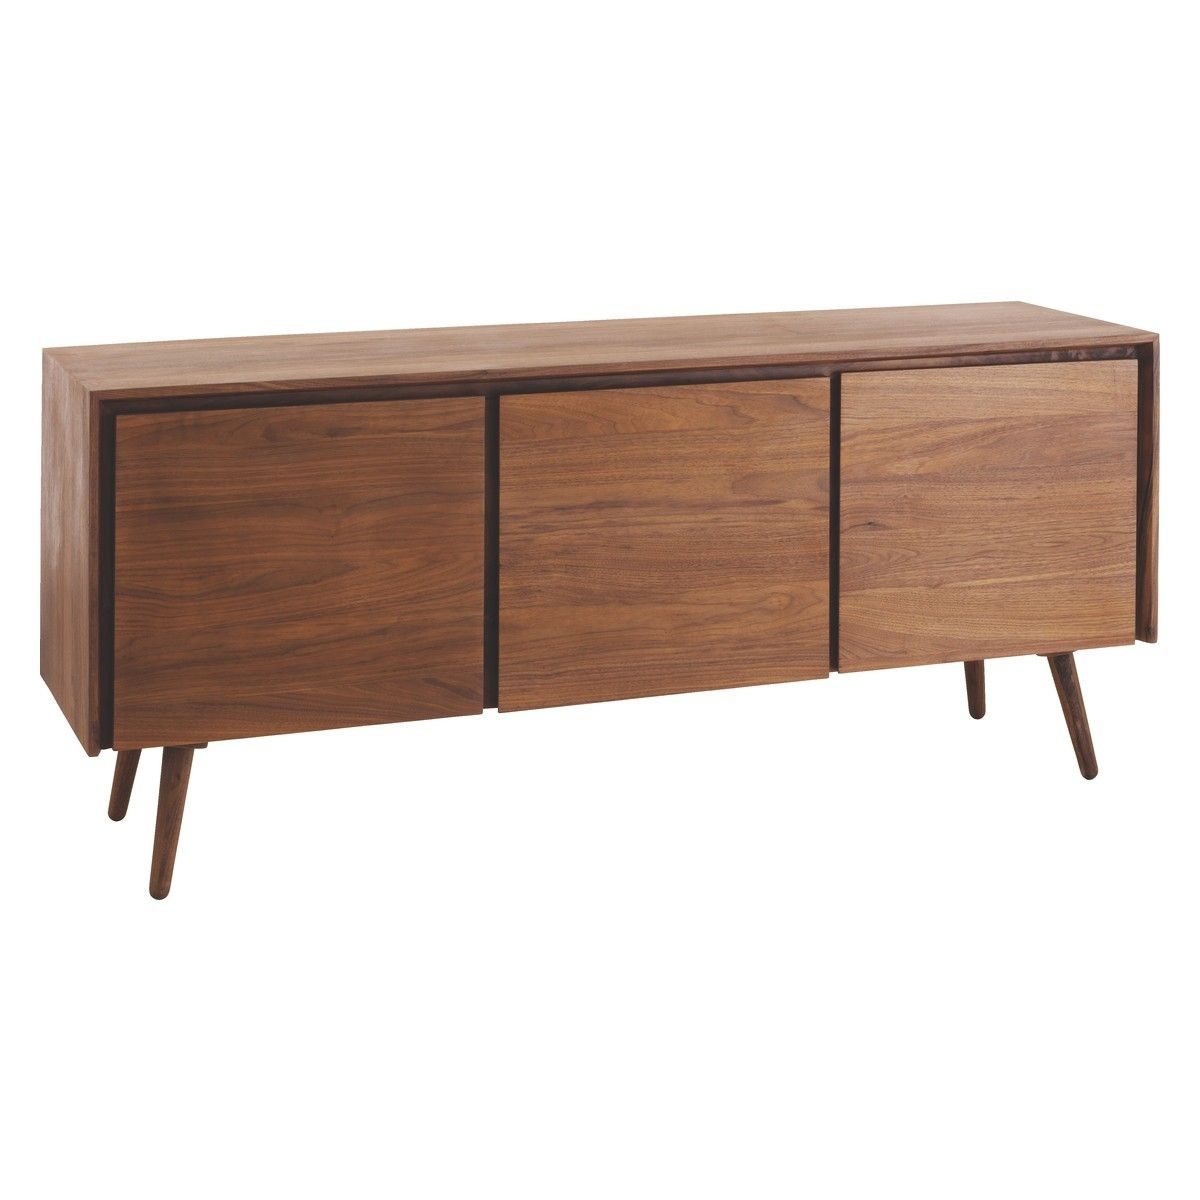 Vince Walnut 3 Door Mid Century Sideboard | Buy Now At Habitat Uk Throughout Walnut Finish Contempo Sideboards (View 14 of 30)